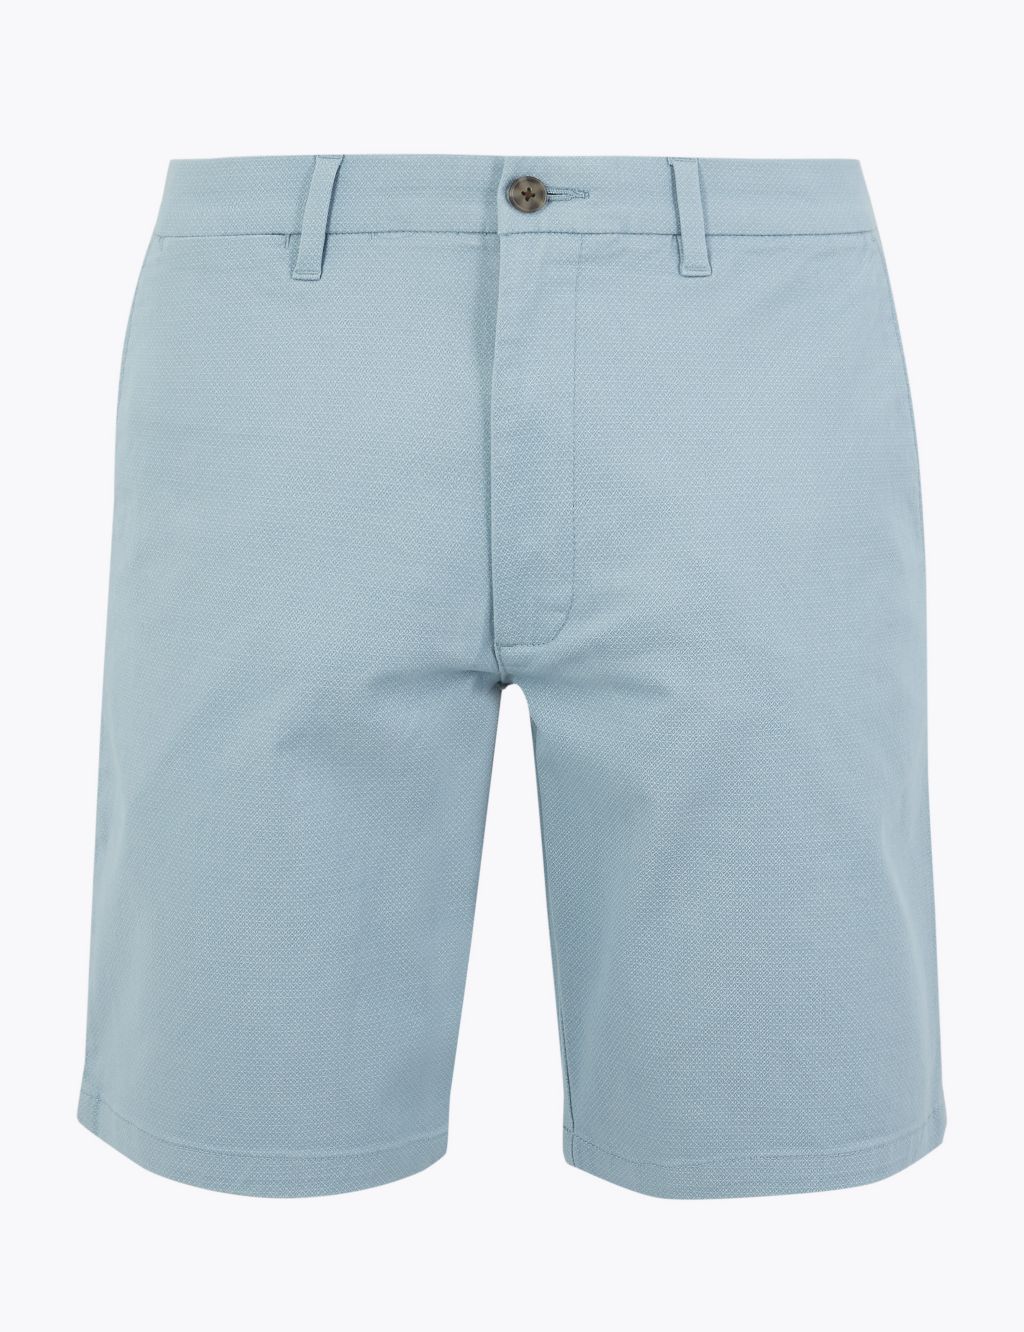 Stretch Printed Chino Shorts | M&S Collection | M&S